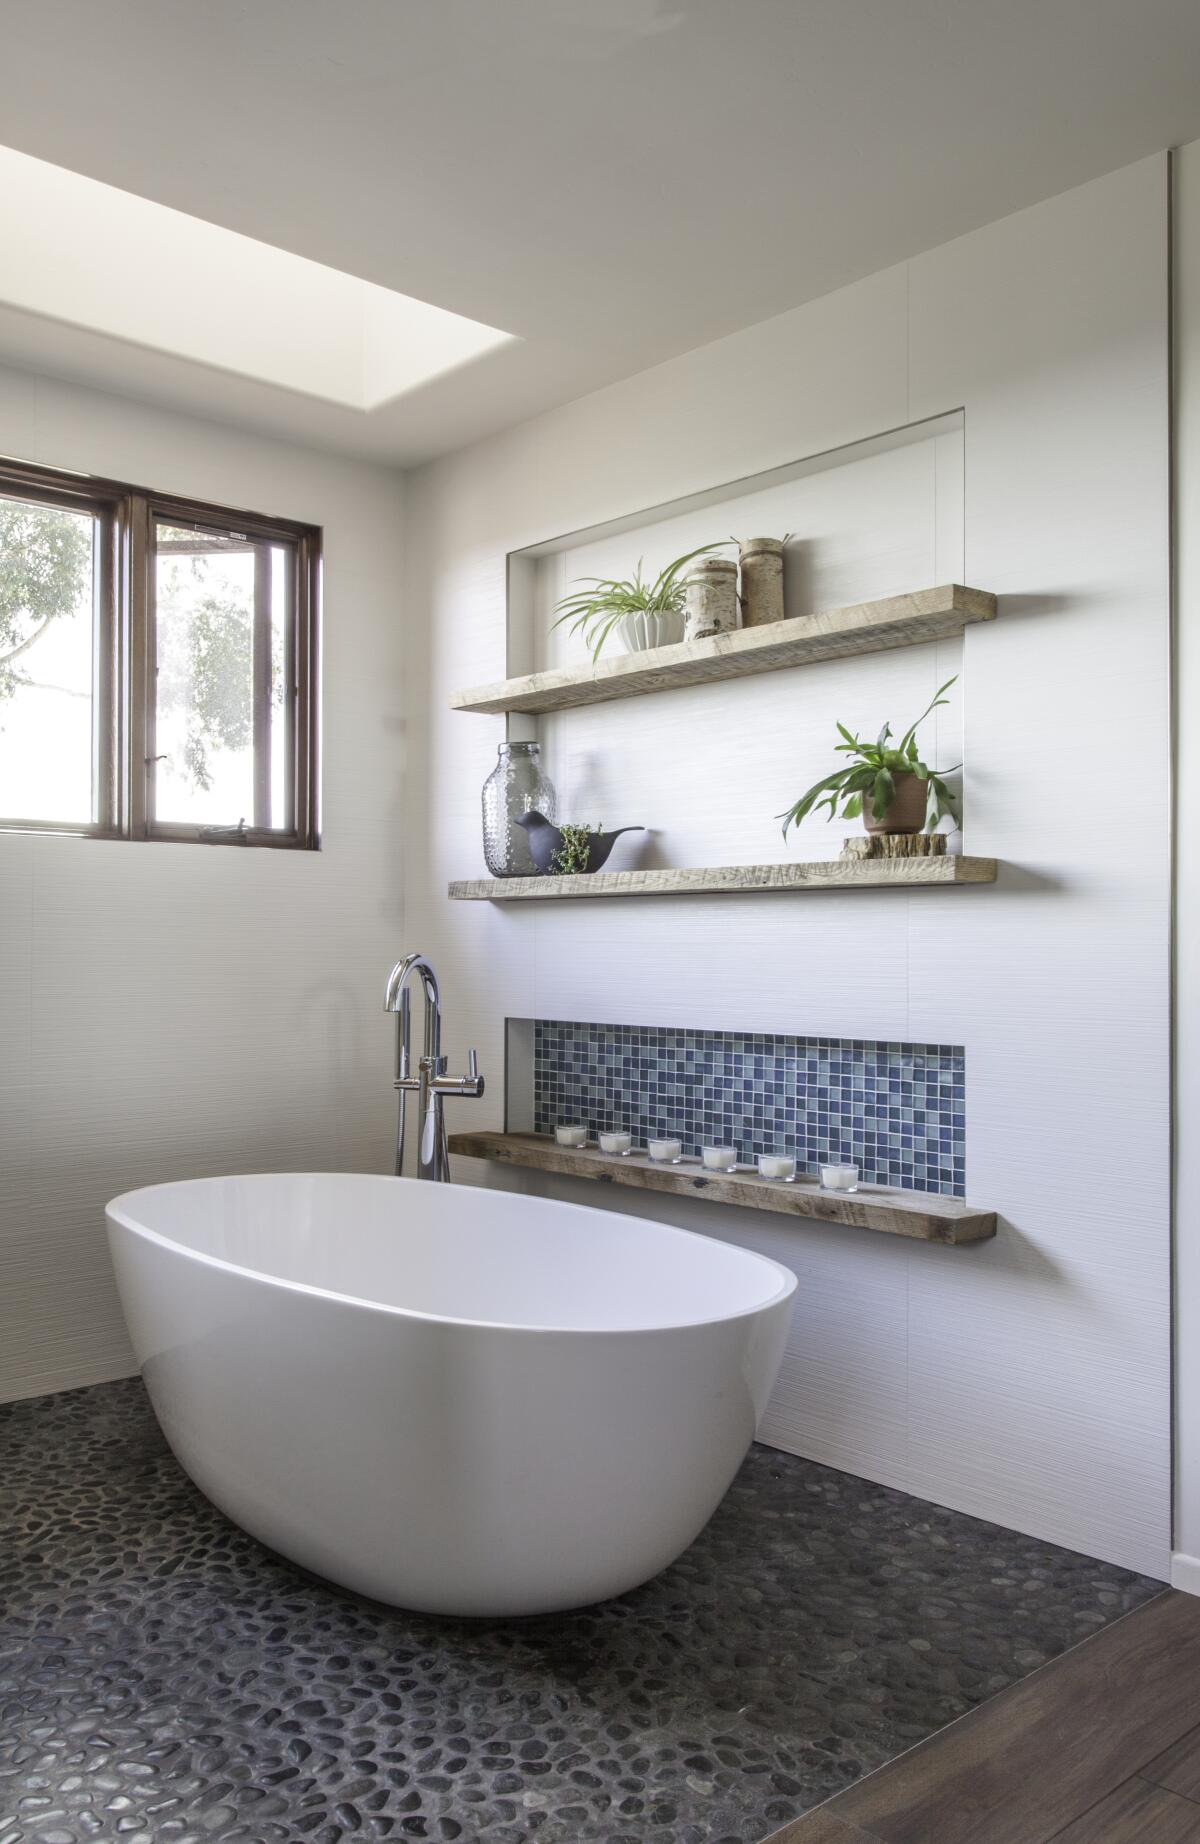 Plants are placed on horizontal shelves alongside the new freestanding tub in the remodeled primary bathroom.